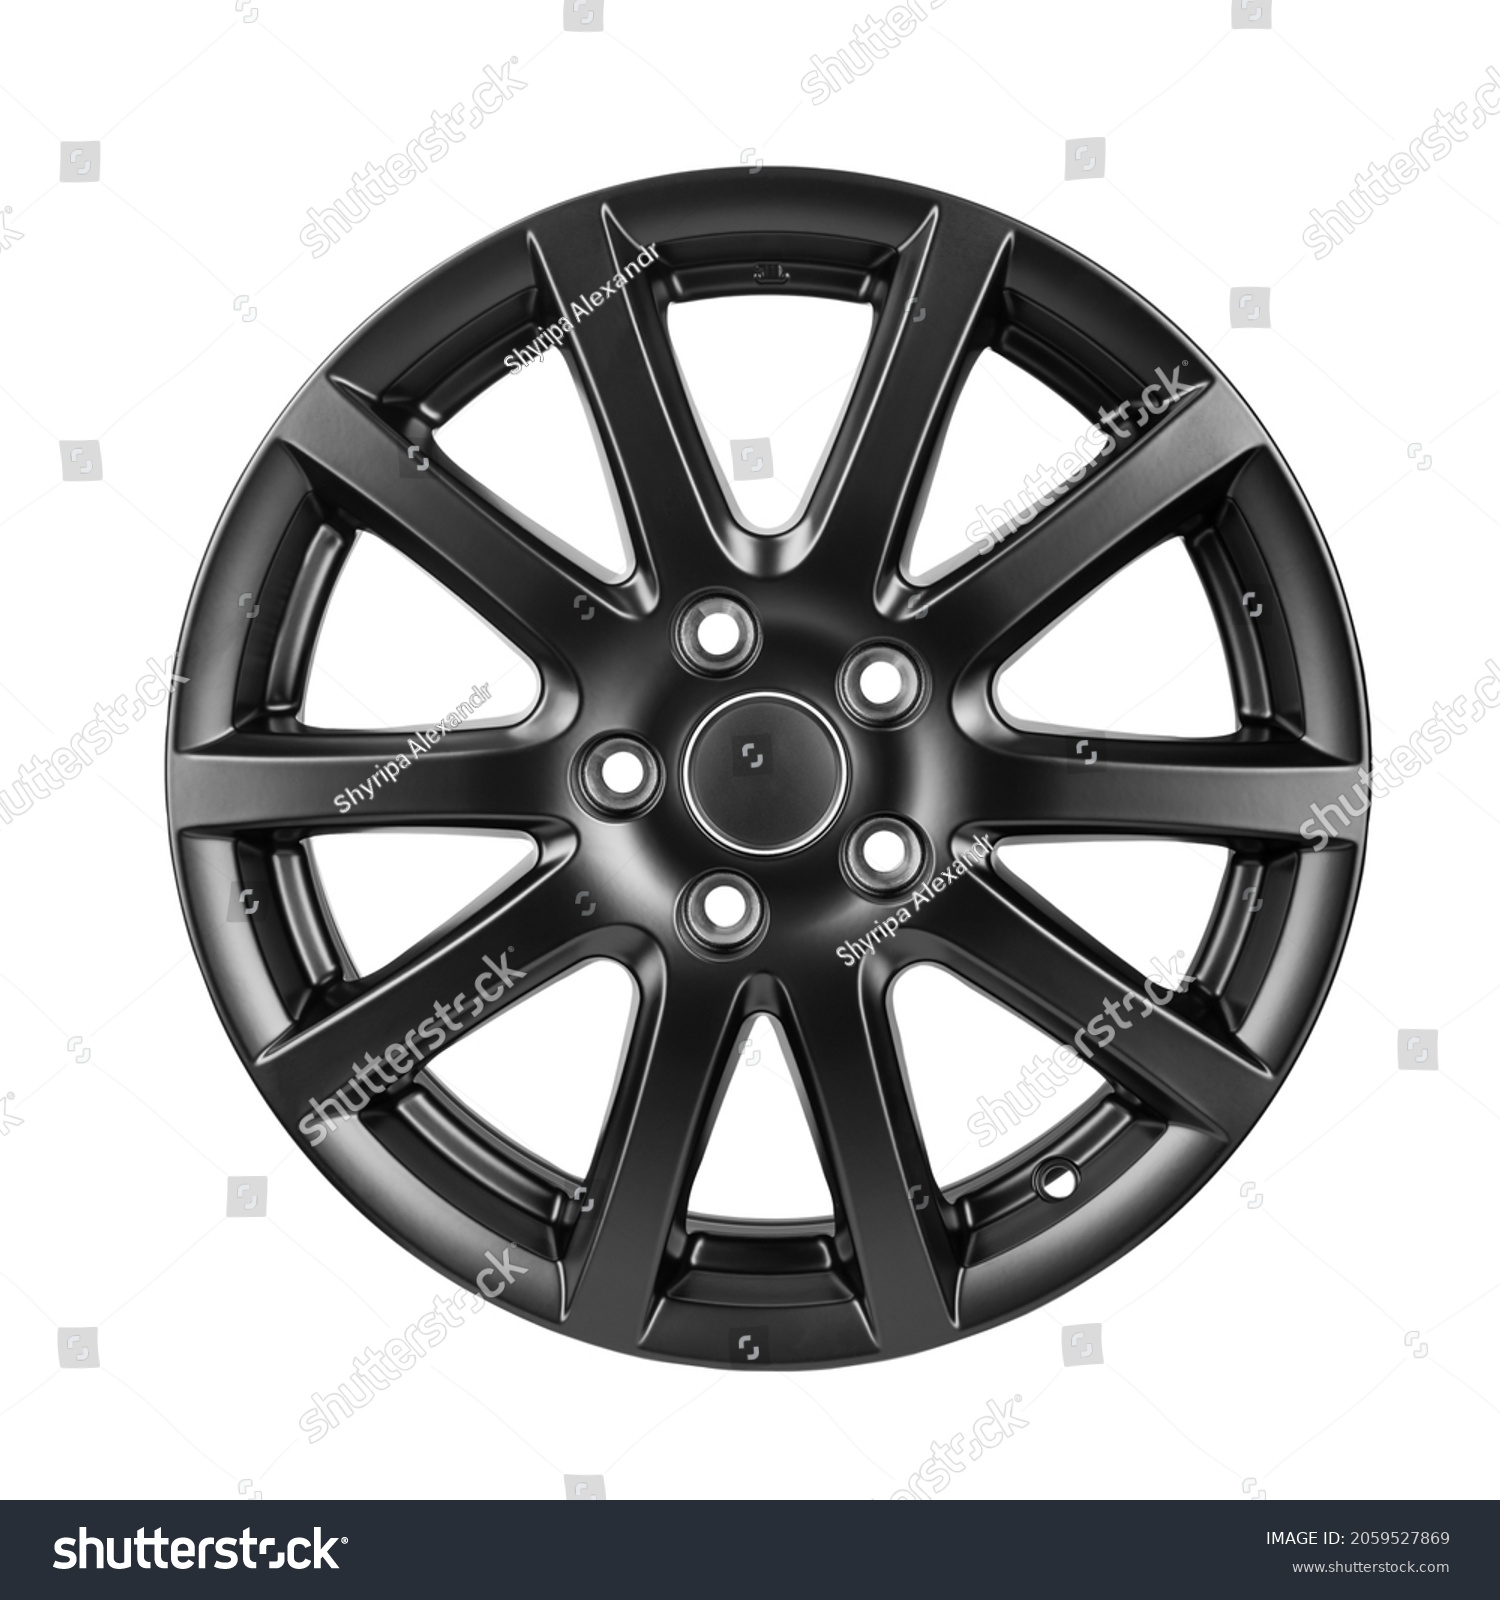 Car Wheel discs. Car wheel Rim black color matt isolated on white background. File contains clipping path. #2059527869